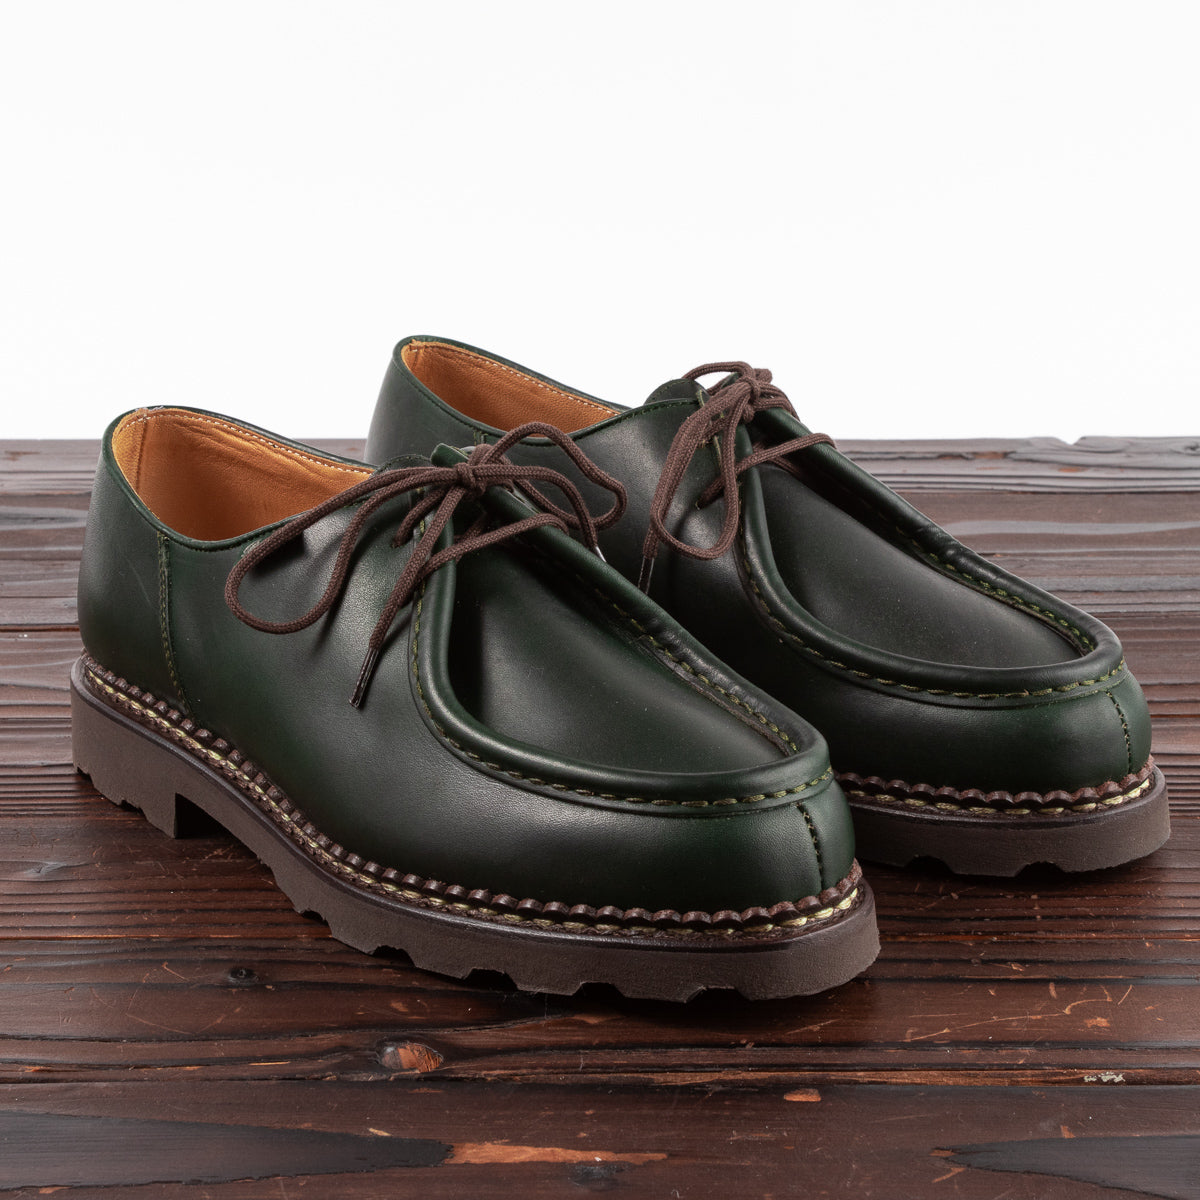 paraboot shoes usa